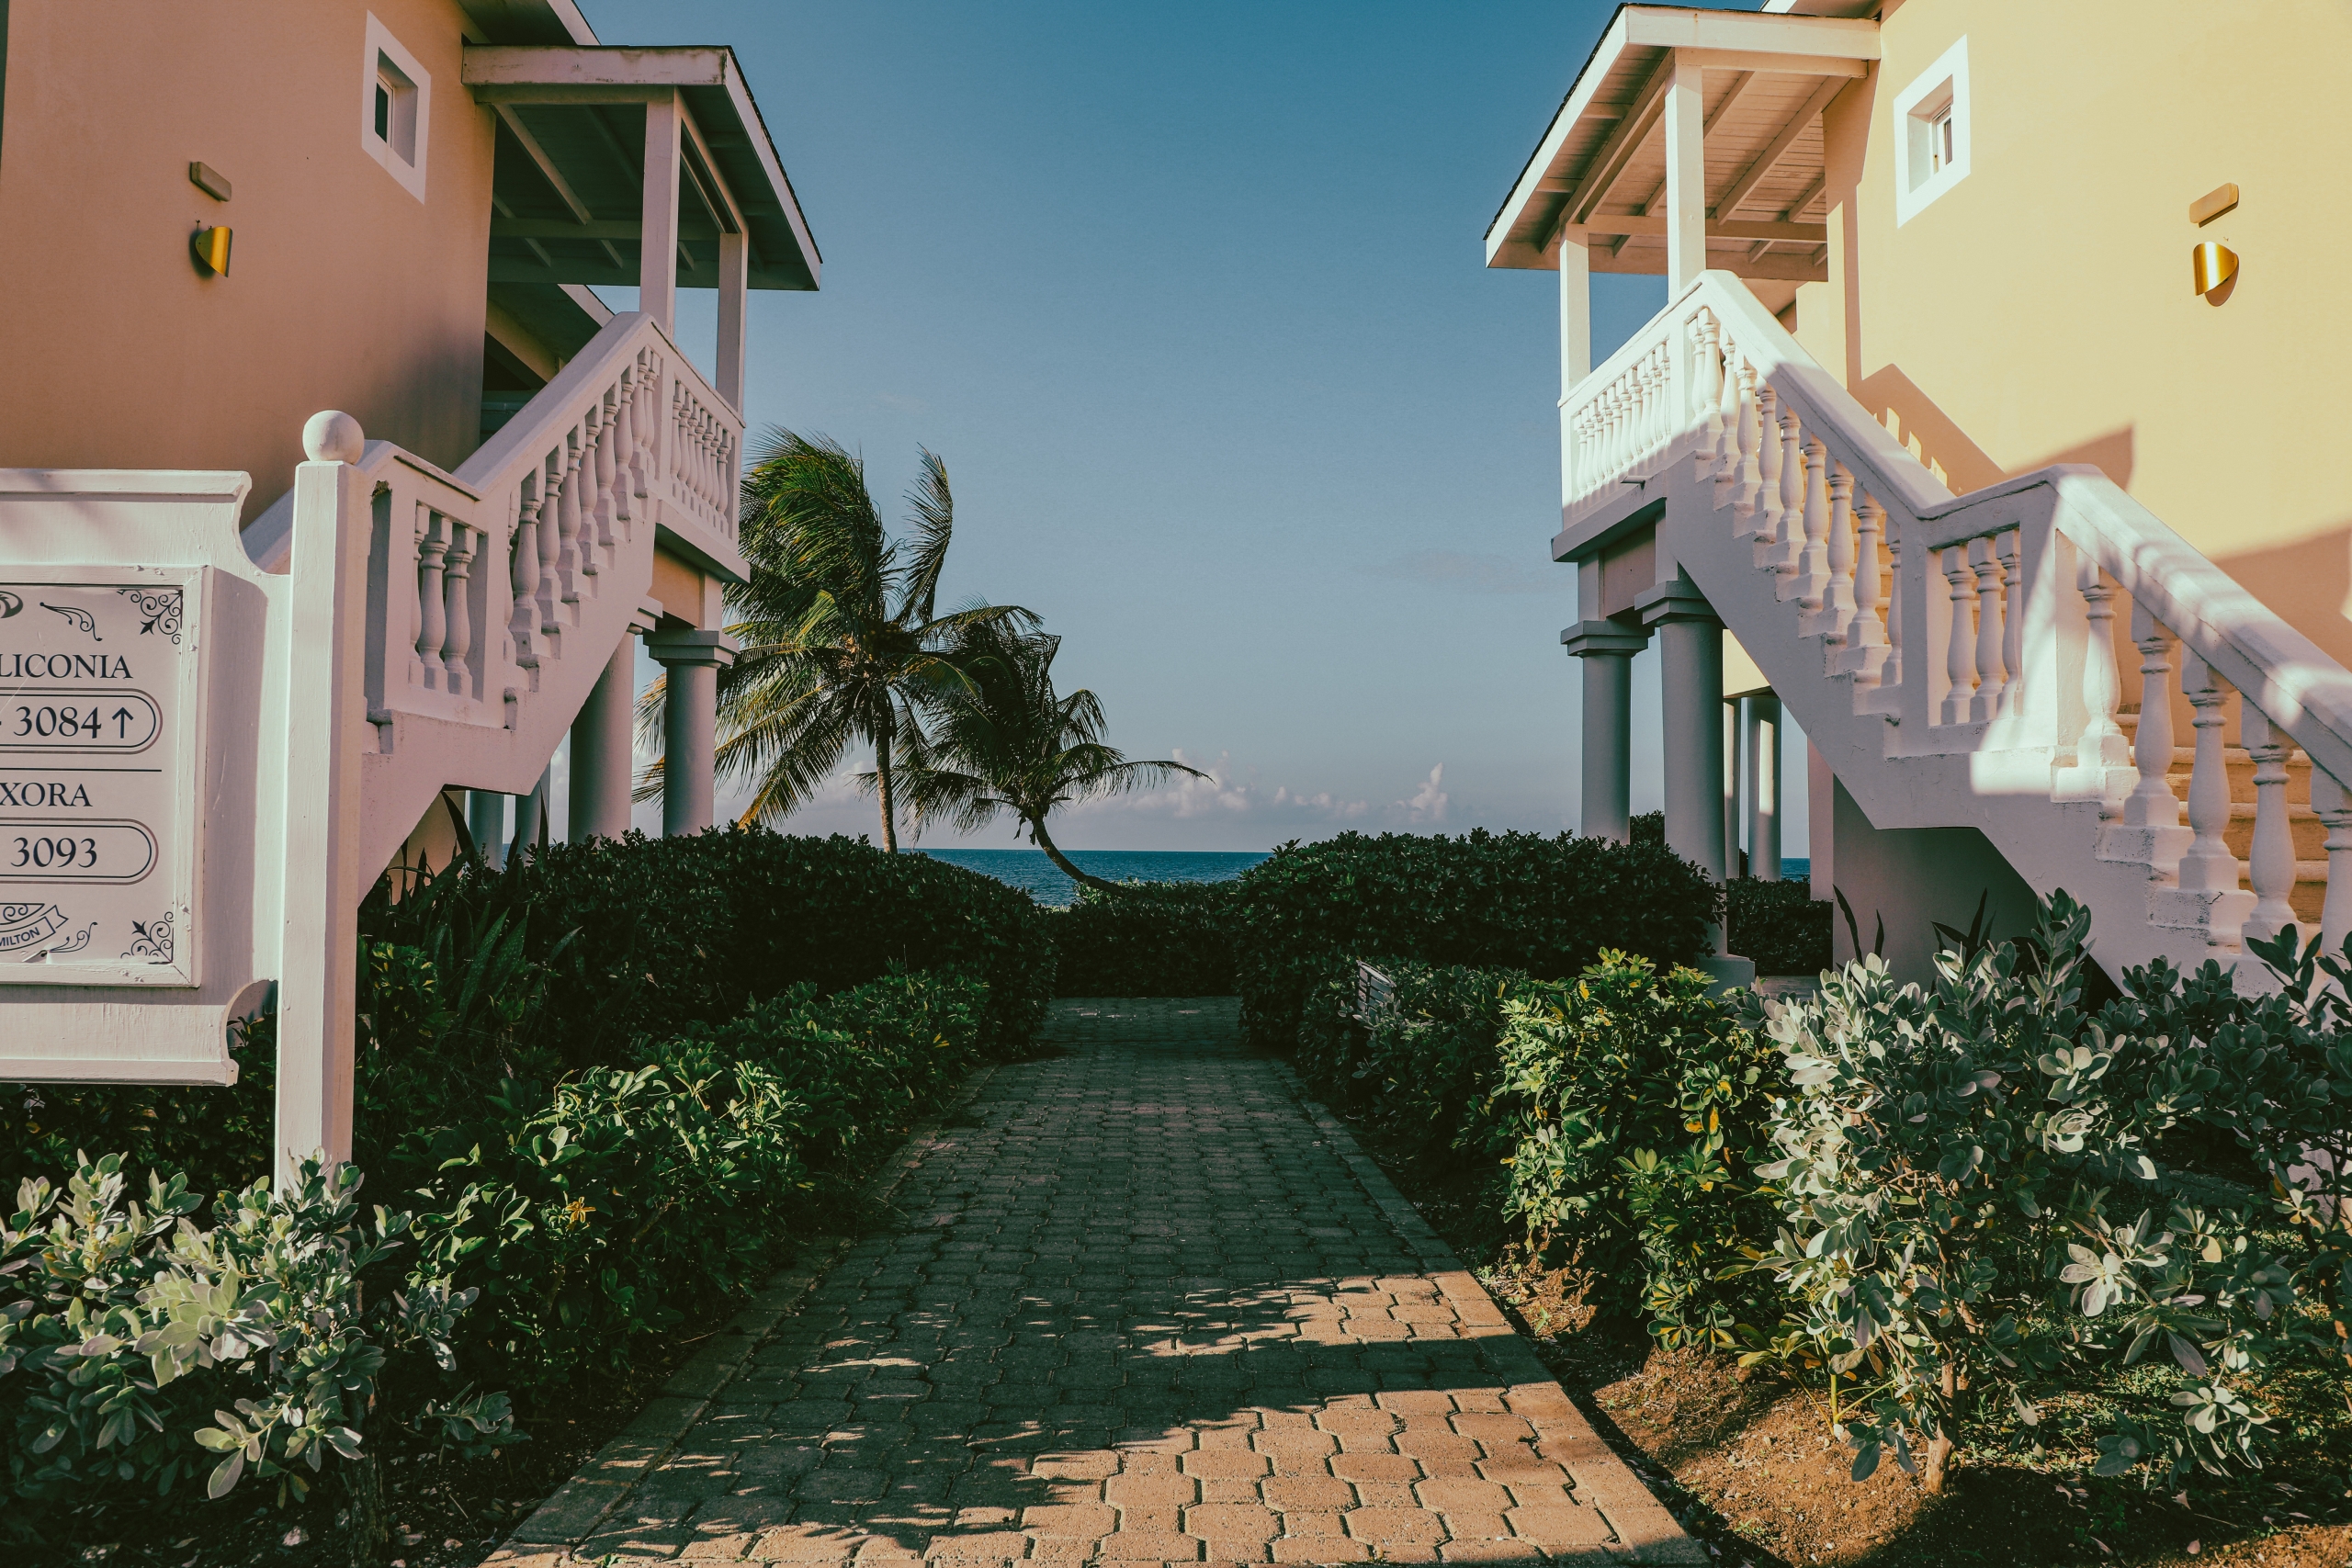 What You Should Know About Foreign Ownership of Property in Jamaica